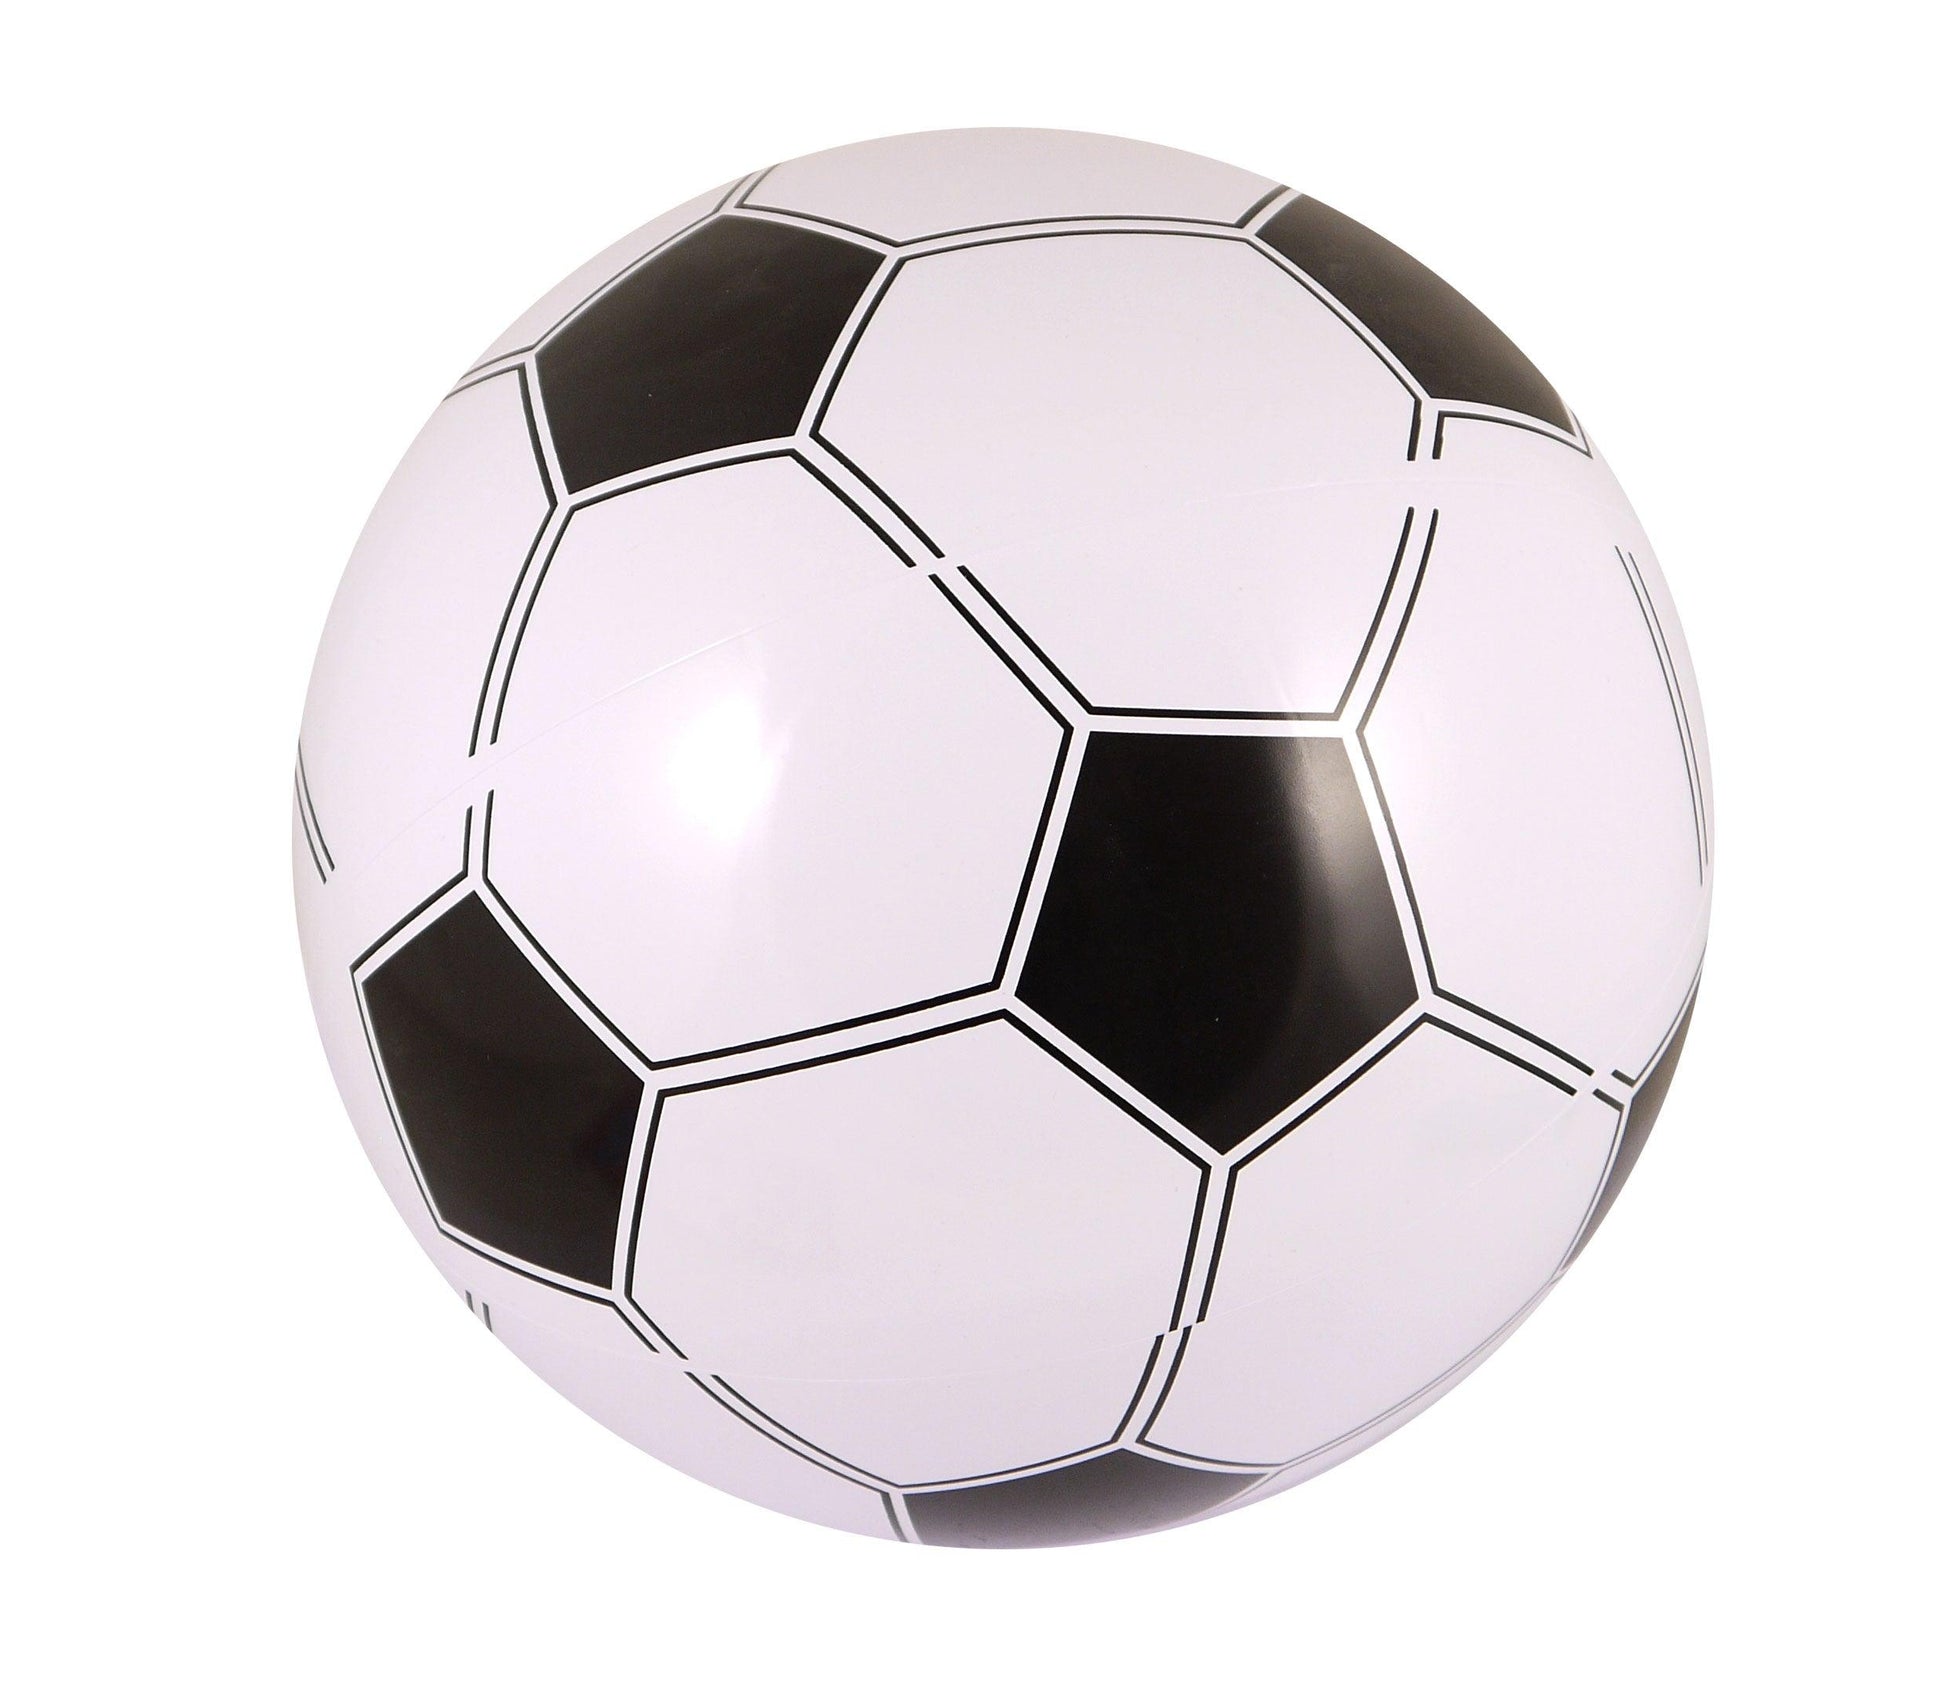 Inflatable Football (40cm) Sports Training Soccer World Cup FIFA Blow Up Ball - Labreeze